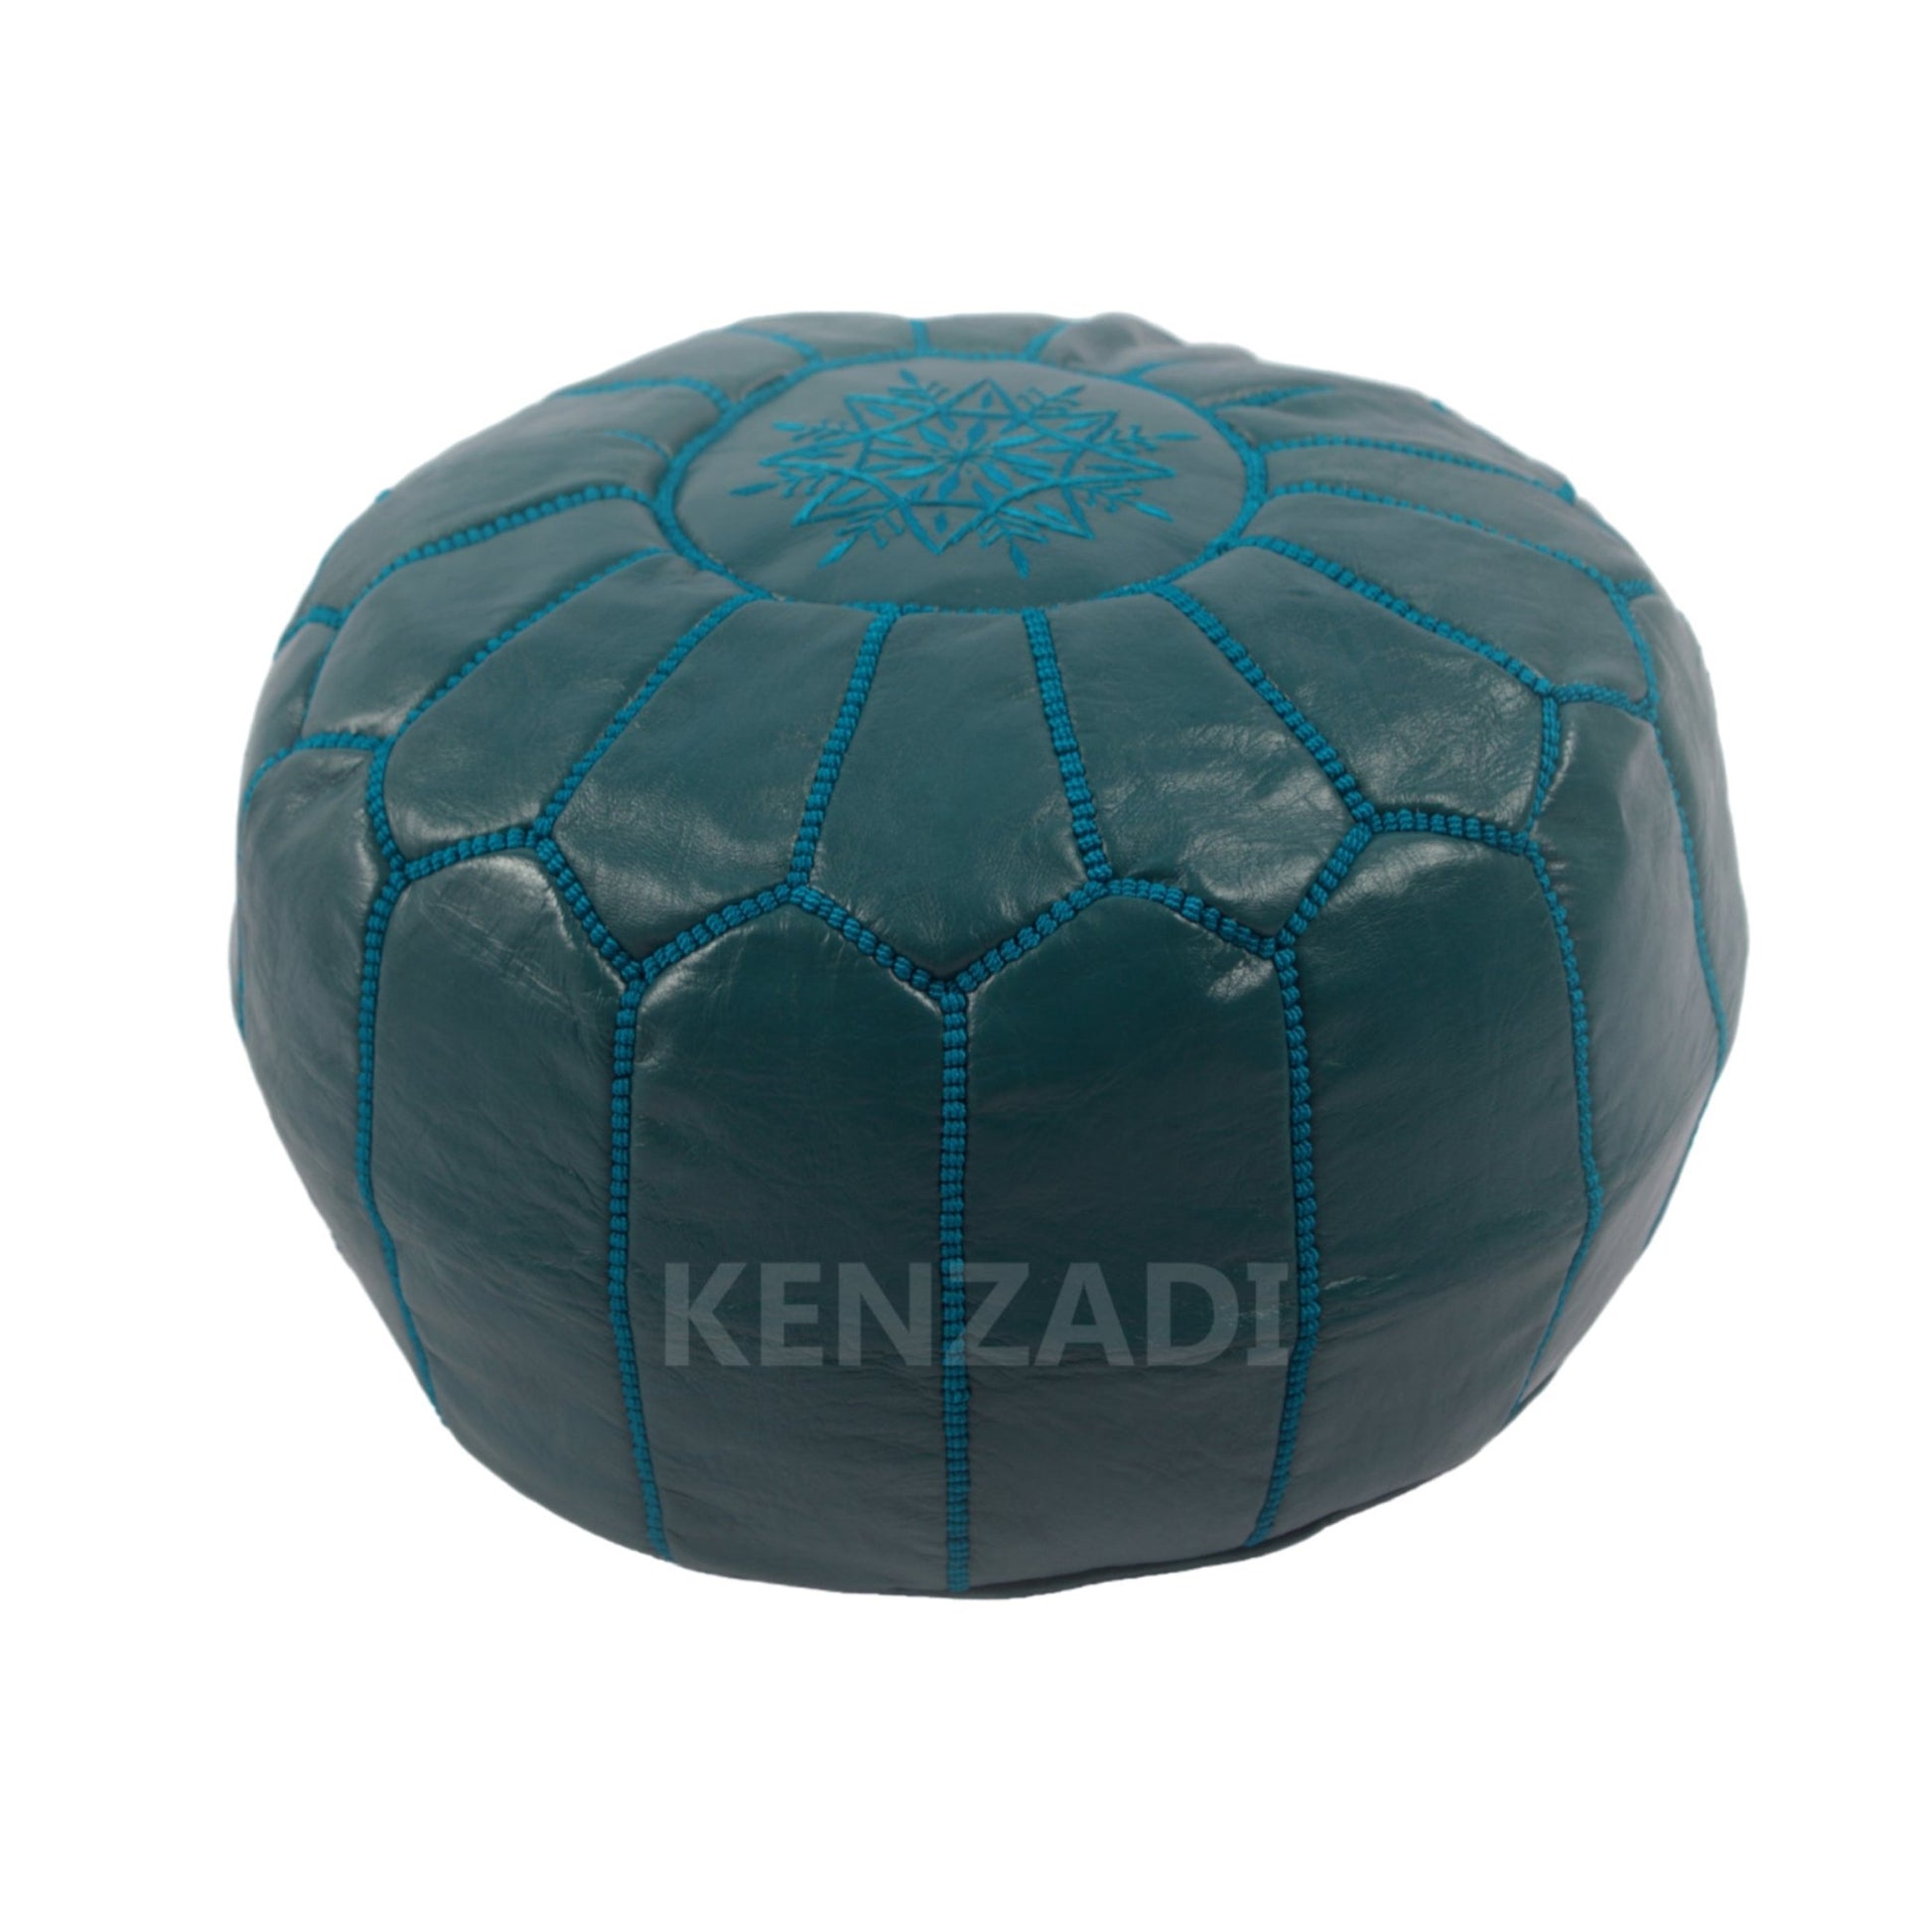 Moroccan leather pouf, round pouf, berber pouf, Dark Blue with Blue embroidery by Kenzadi - Handmade by My Poufs